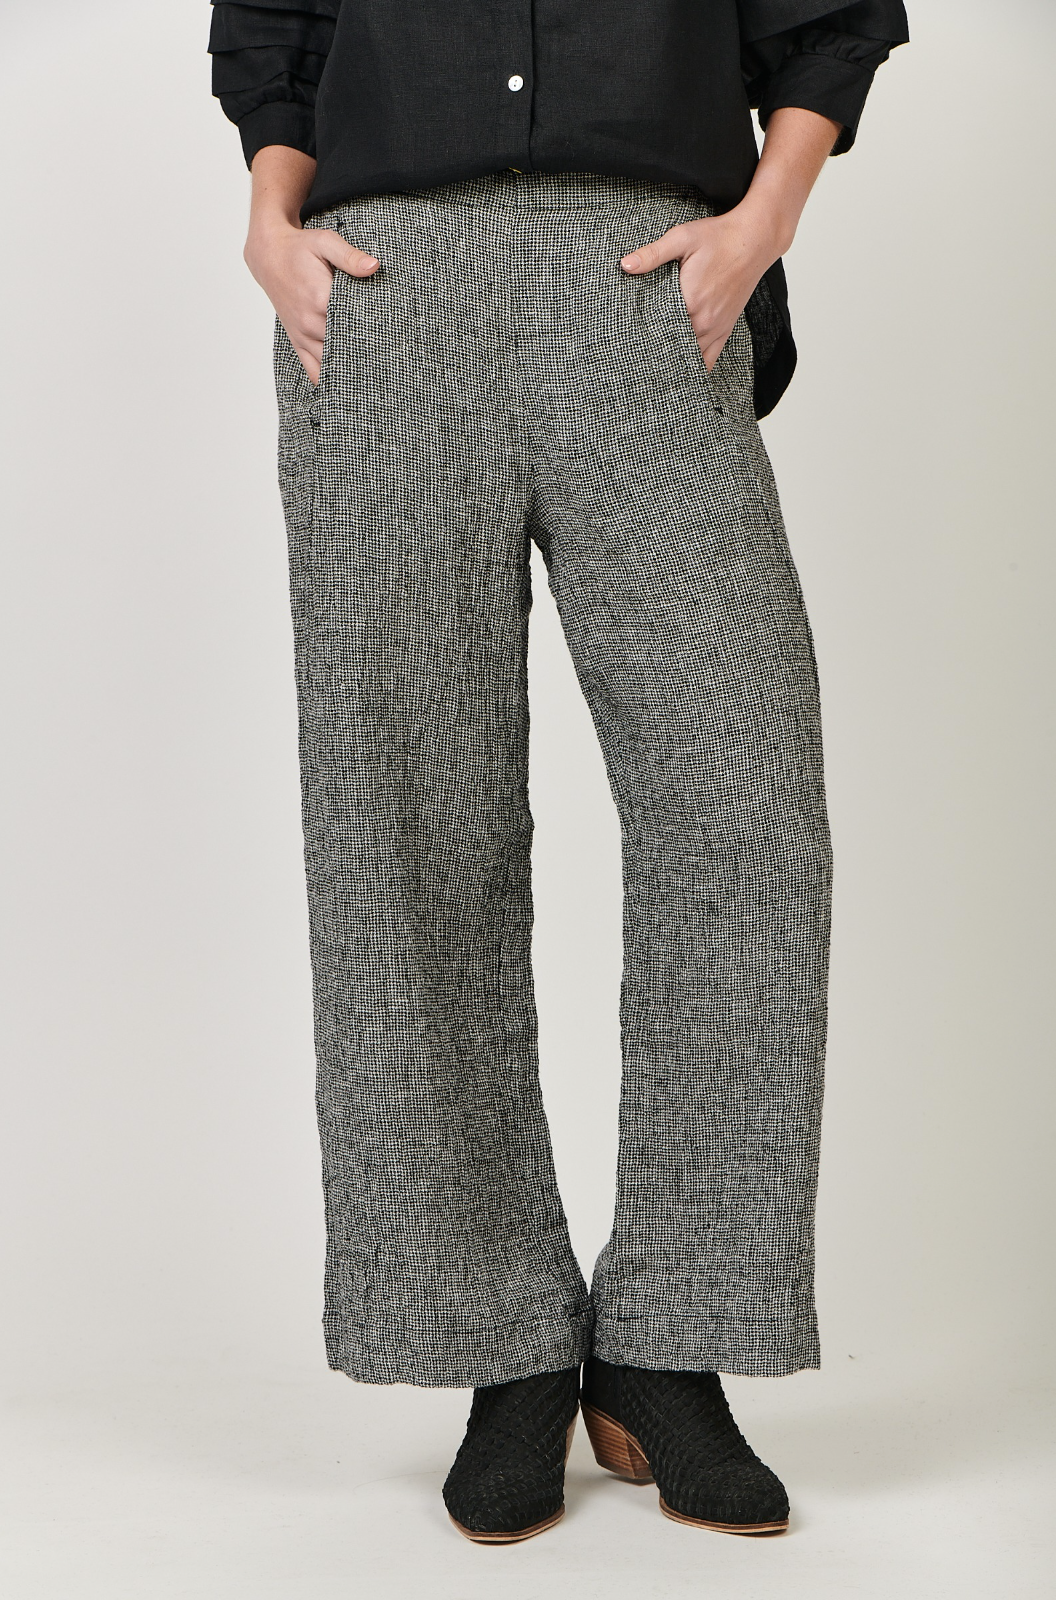 Naturals by O & J Linen Pant in Black Puppytooth